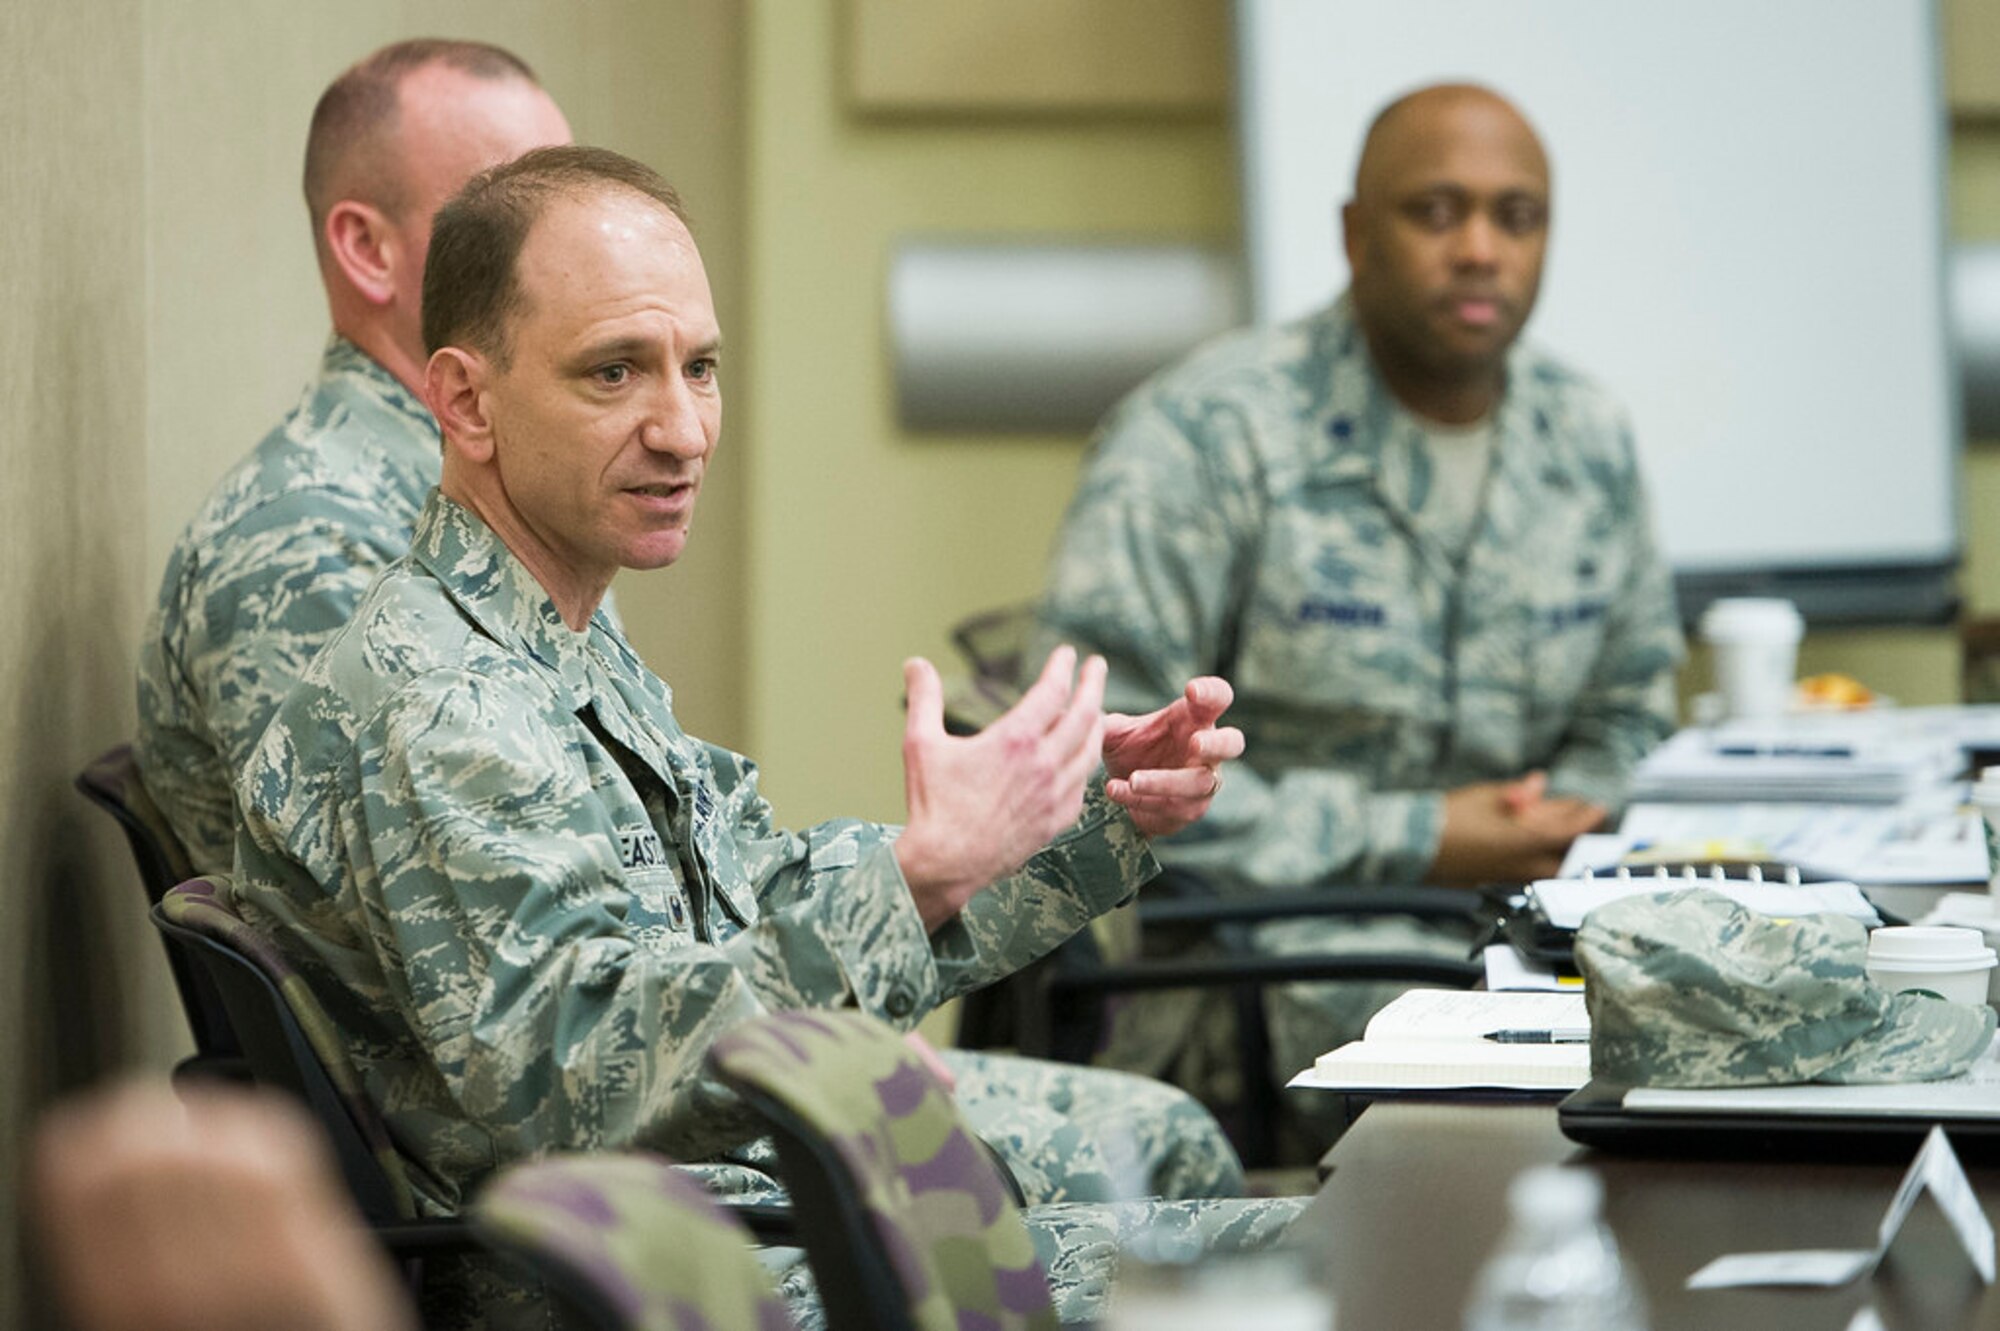 Col. Kevin M. Eastland, Air Force District of Washington vice commander, answers questions during the 2019 AFDW Squadron Commanders Course at Joint Base Andrews, Md., April 15, 2019. (U.S. Air Force photo by Master Sgt. Michael B. Keller)